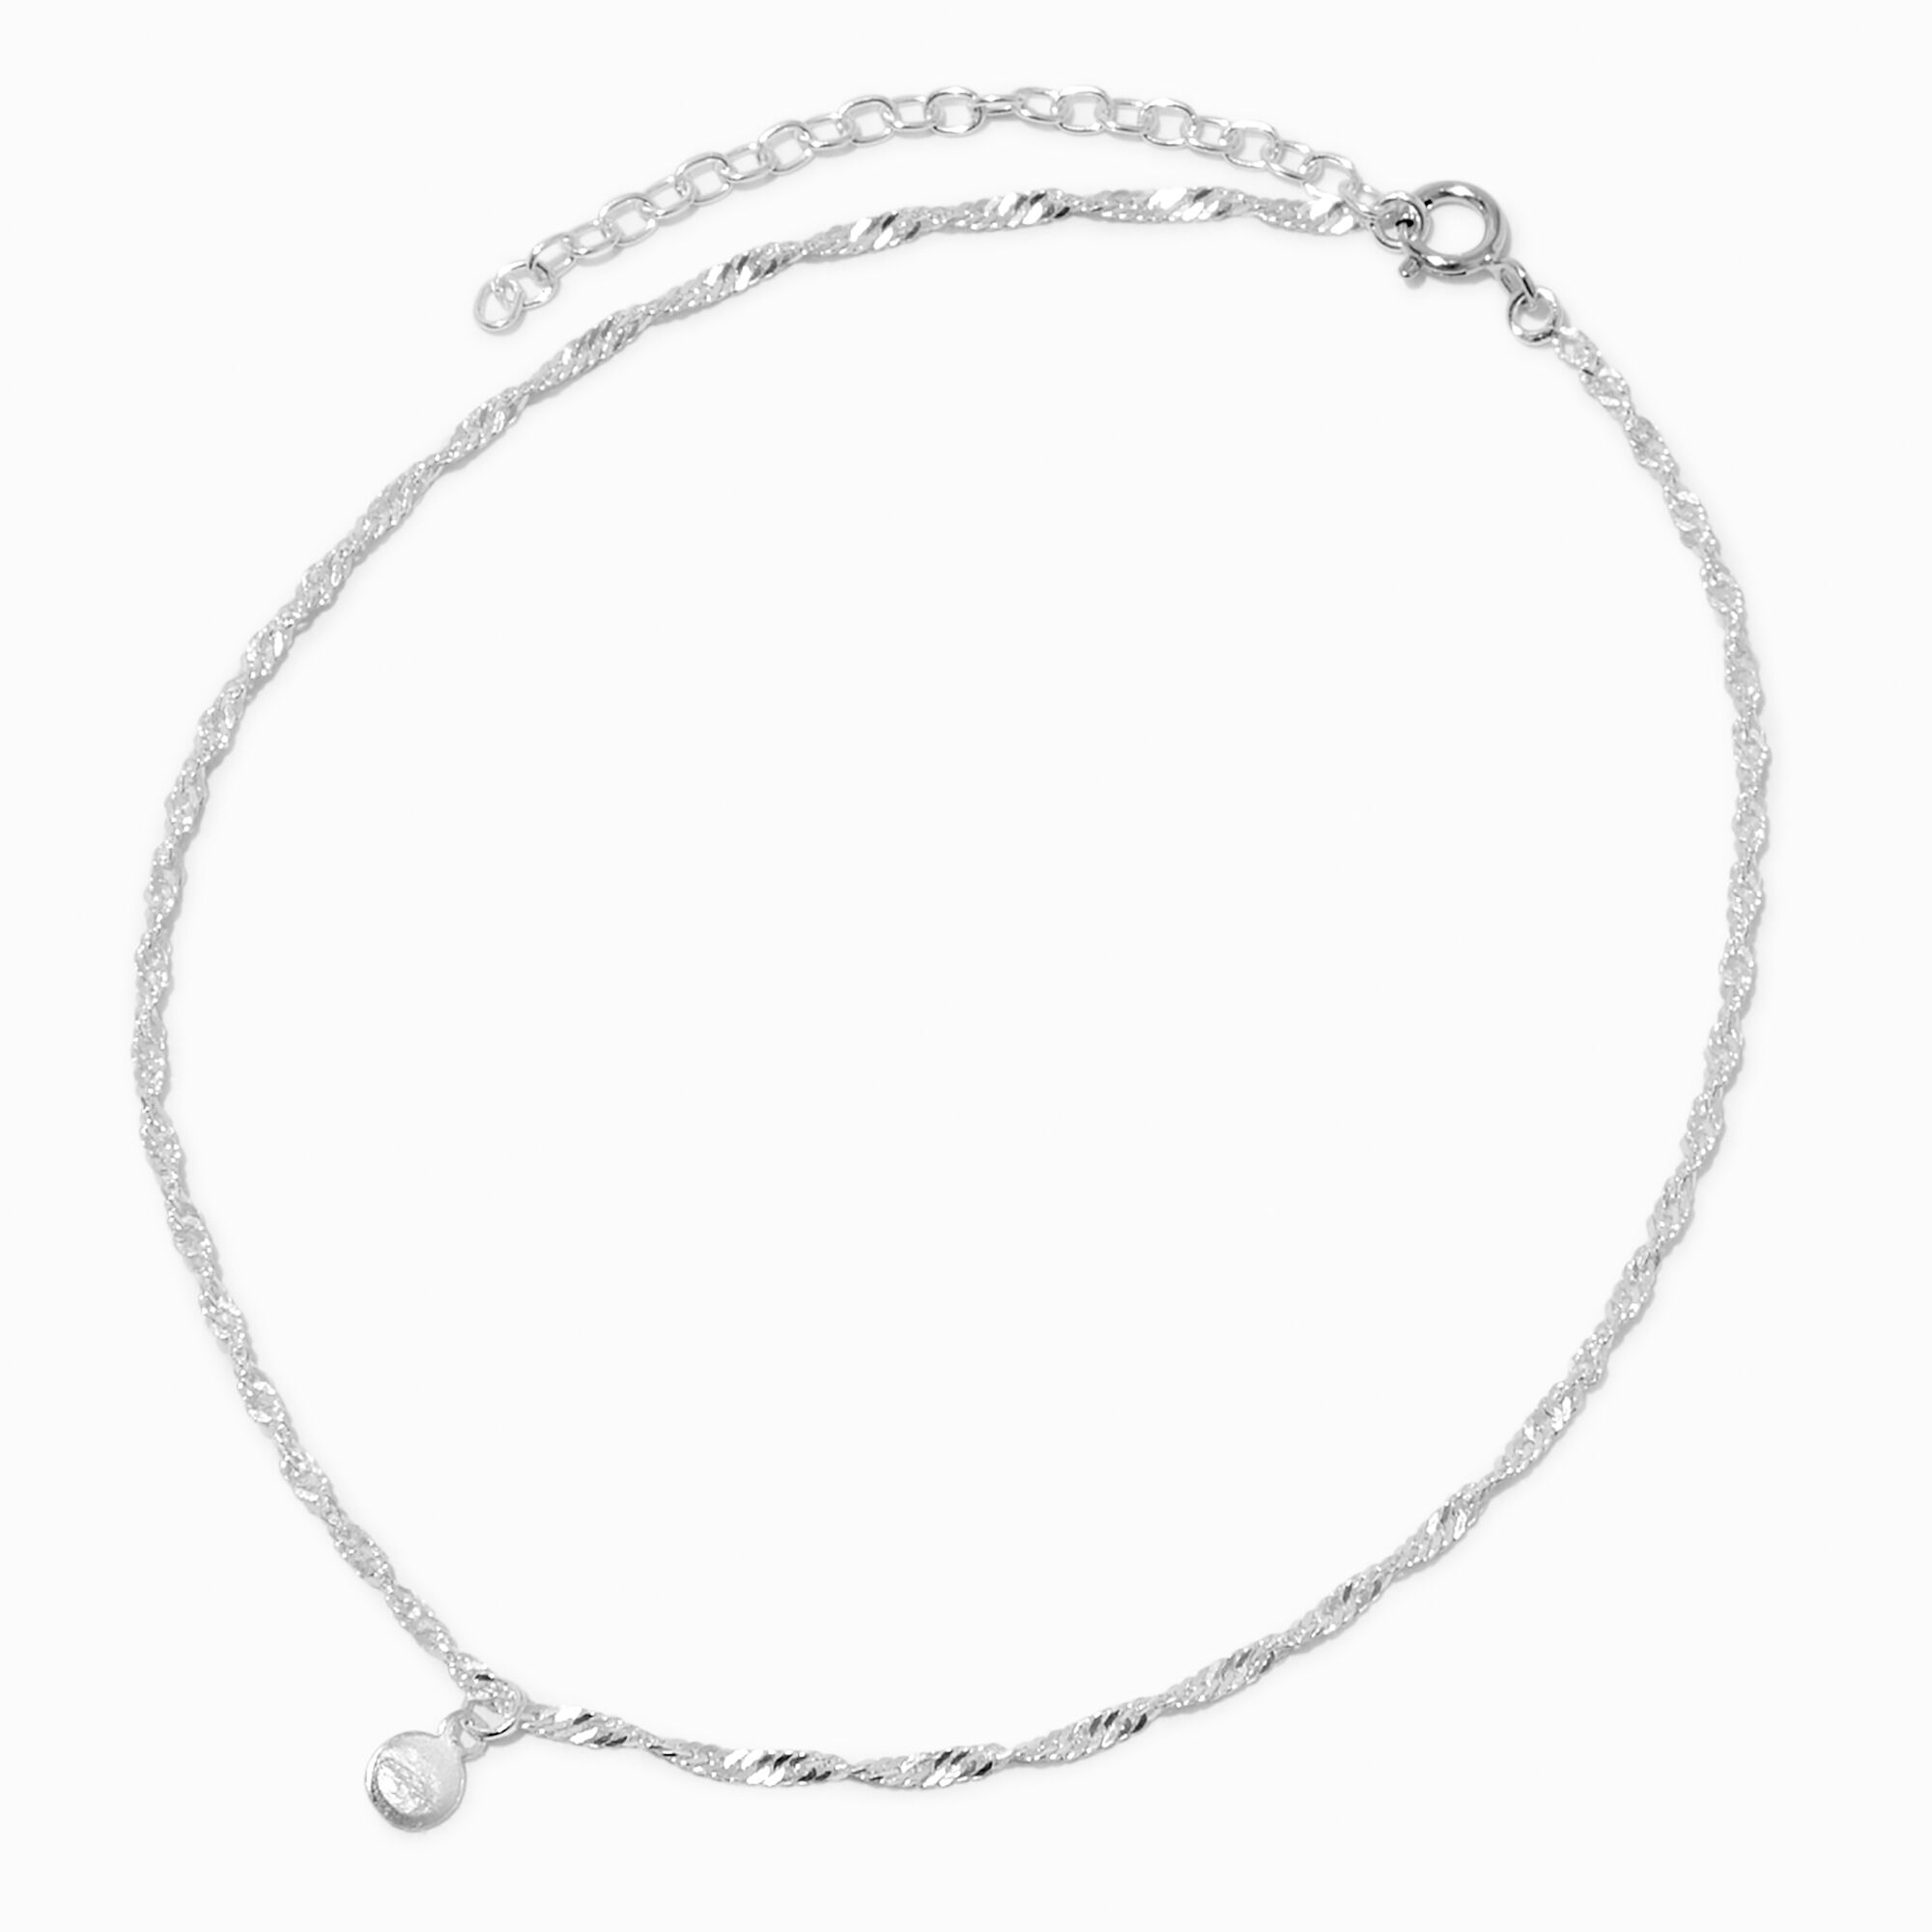 View C Luxe By Claires Twisted Chain Anklet Silver information